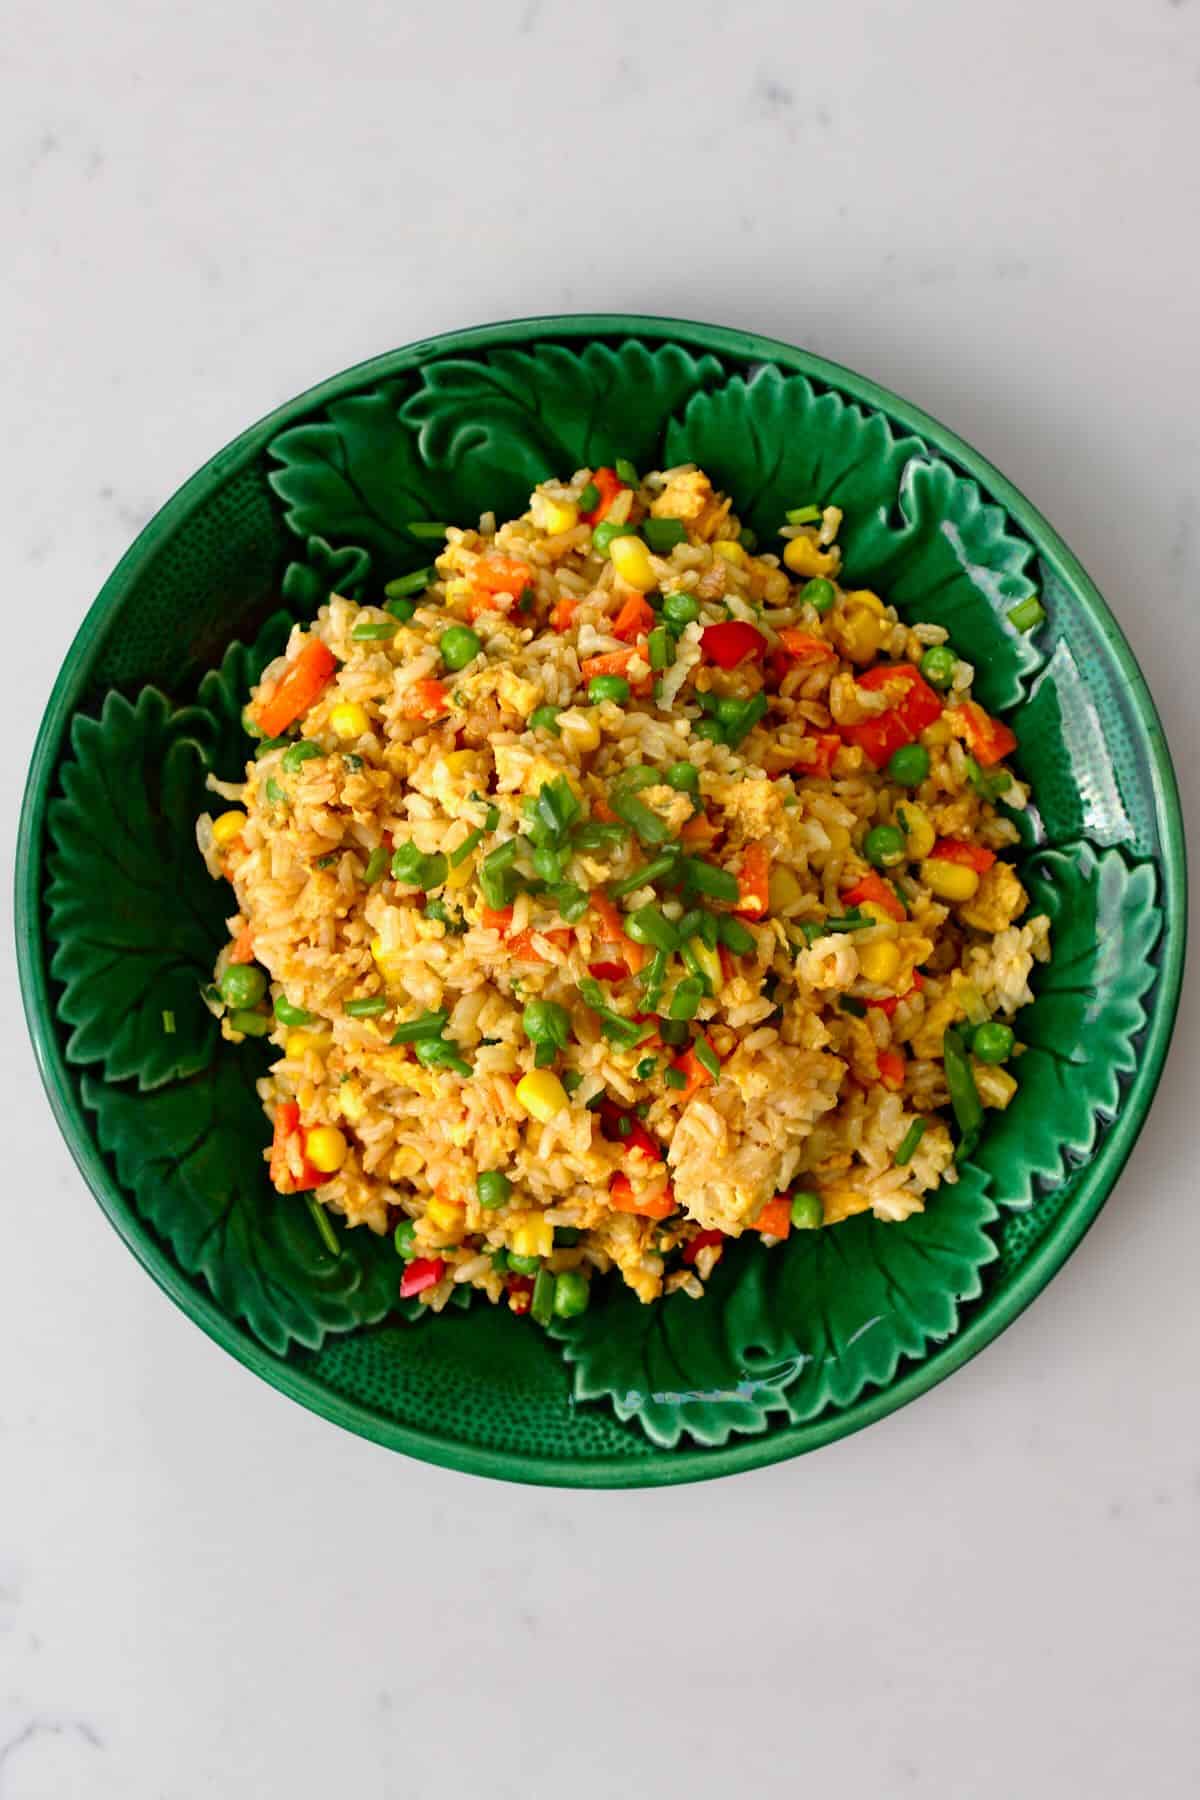 A serving of egg fried rice